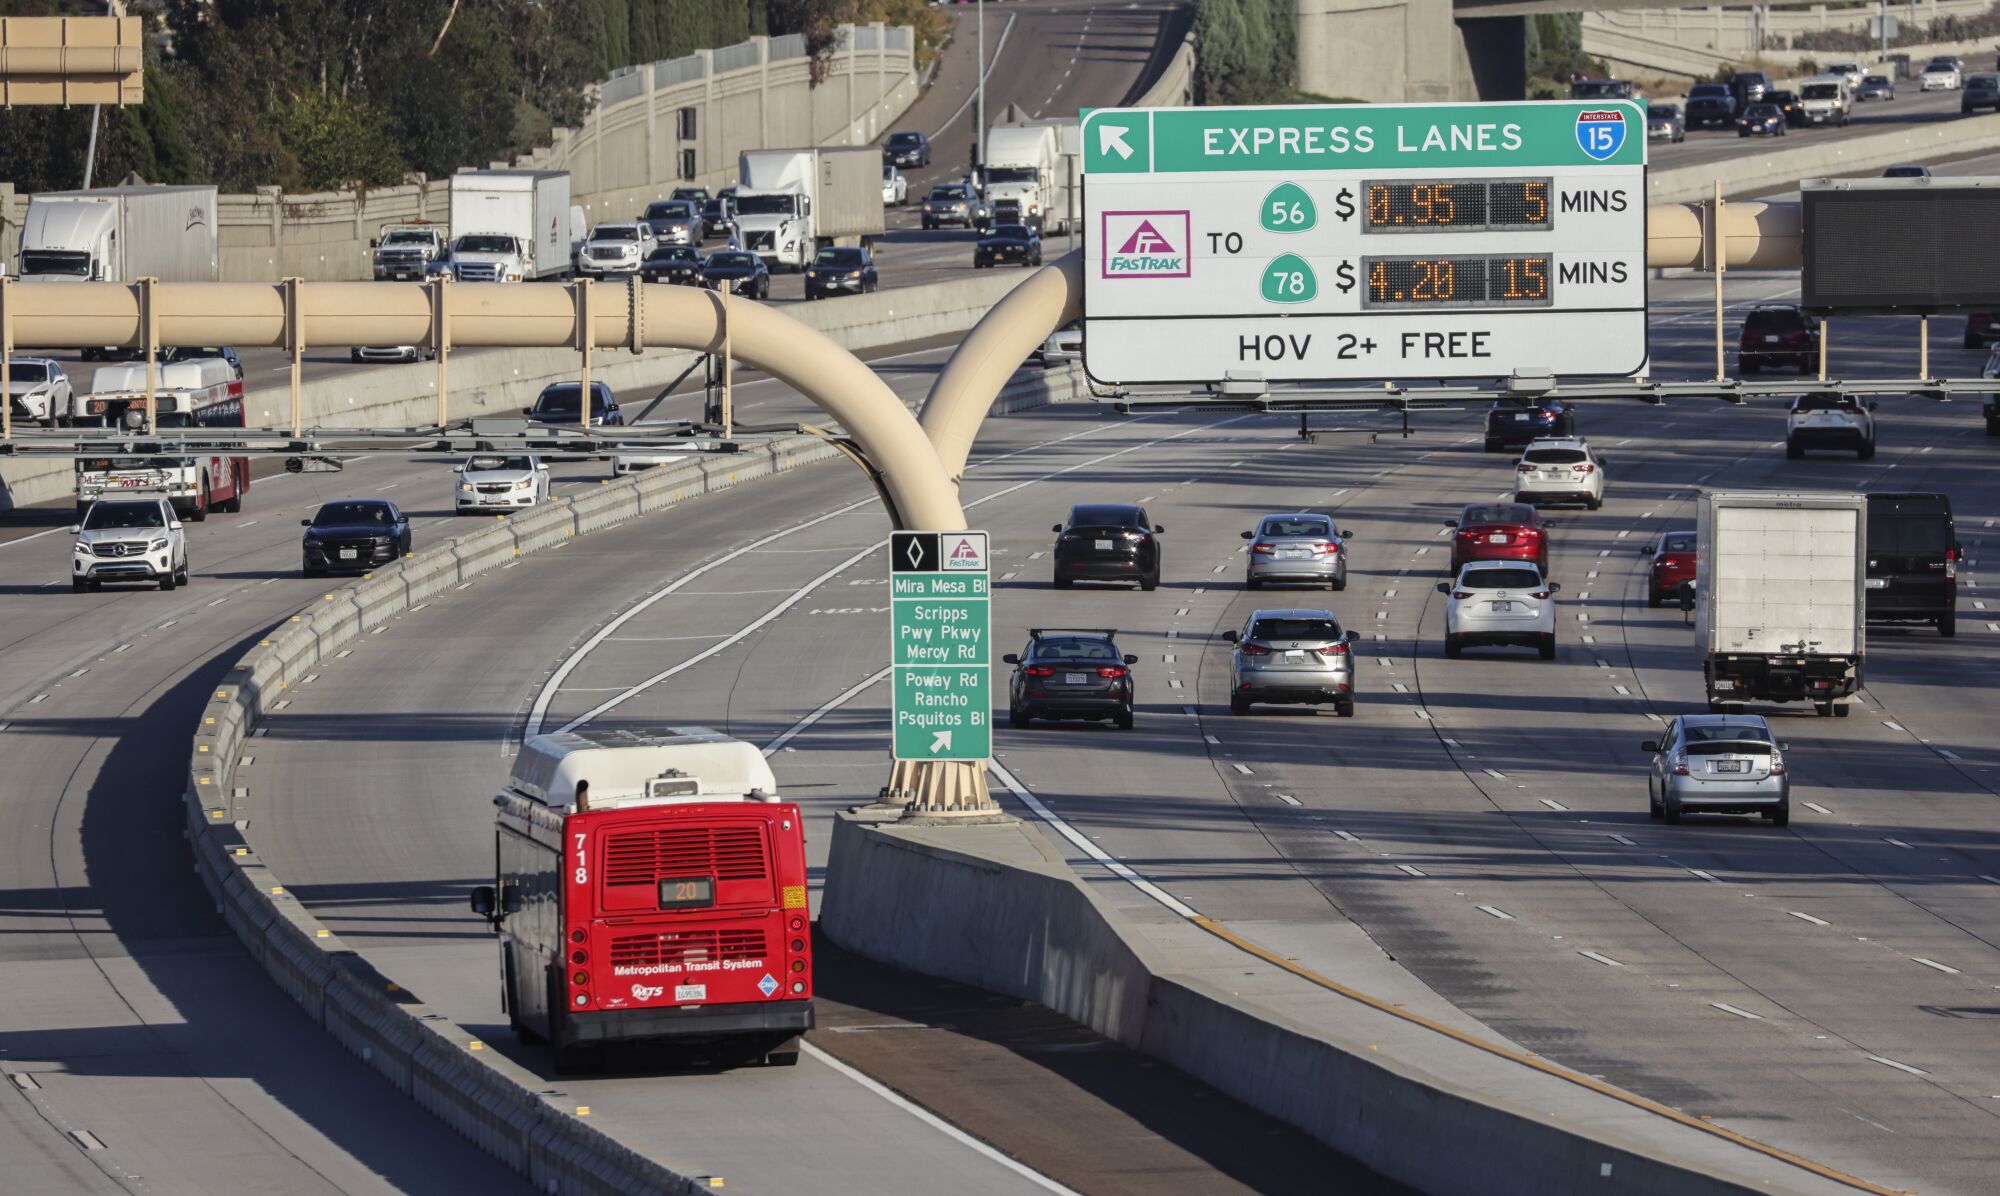 A bus on an express lane in the middle of a freeway with a sign displaying tolls